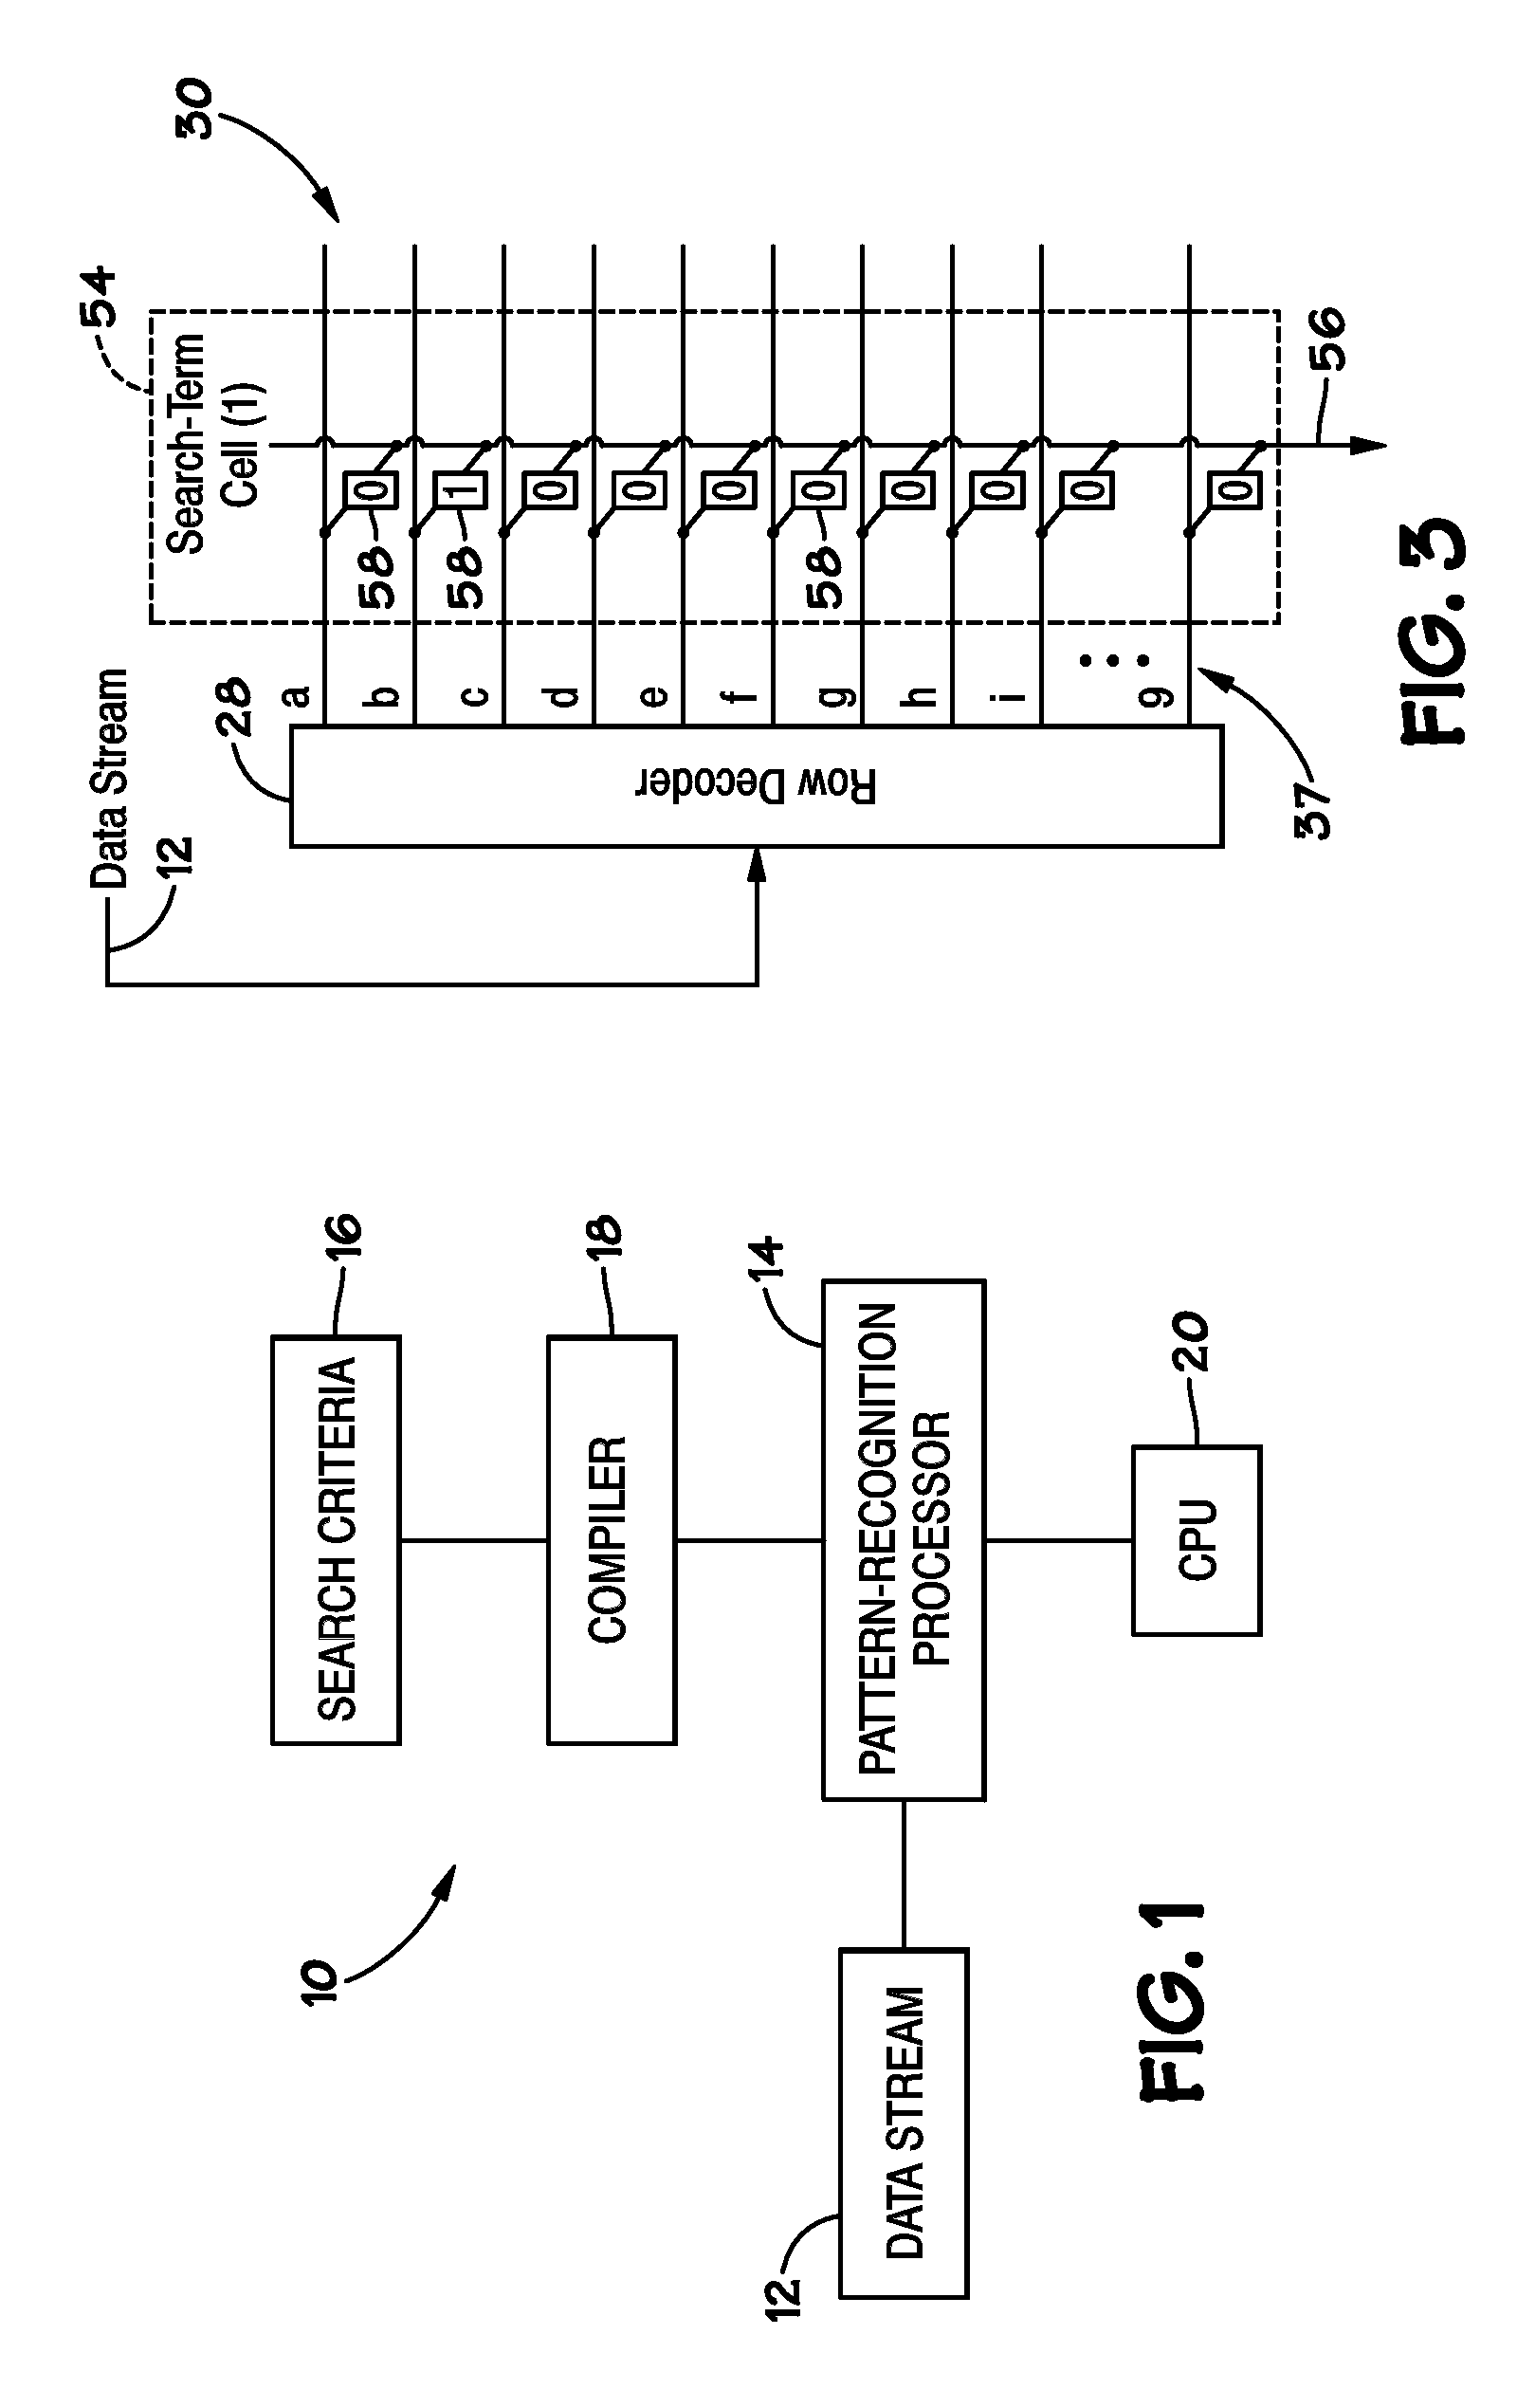 Methods and Systems to Accomplish Variable Width Data Input